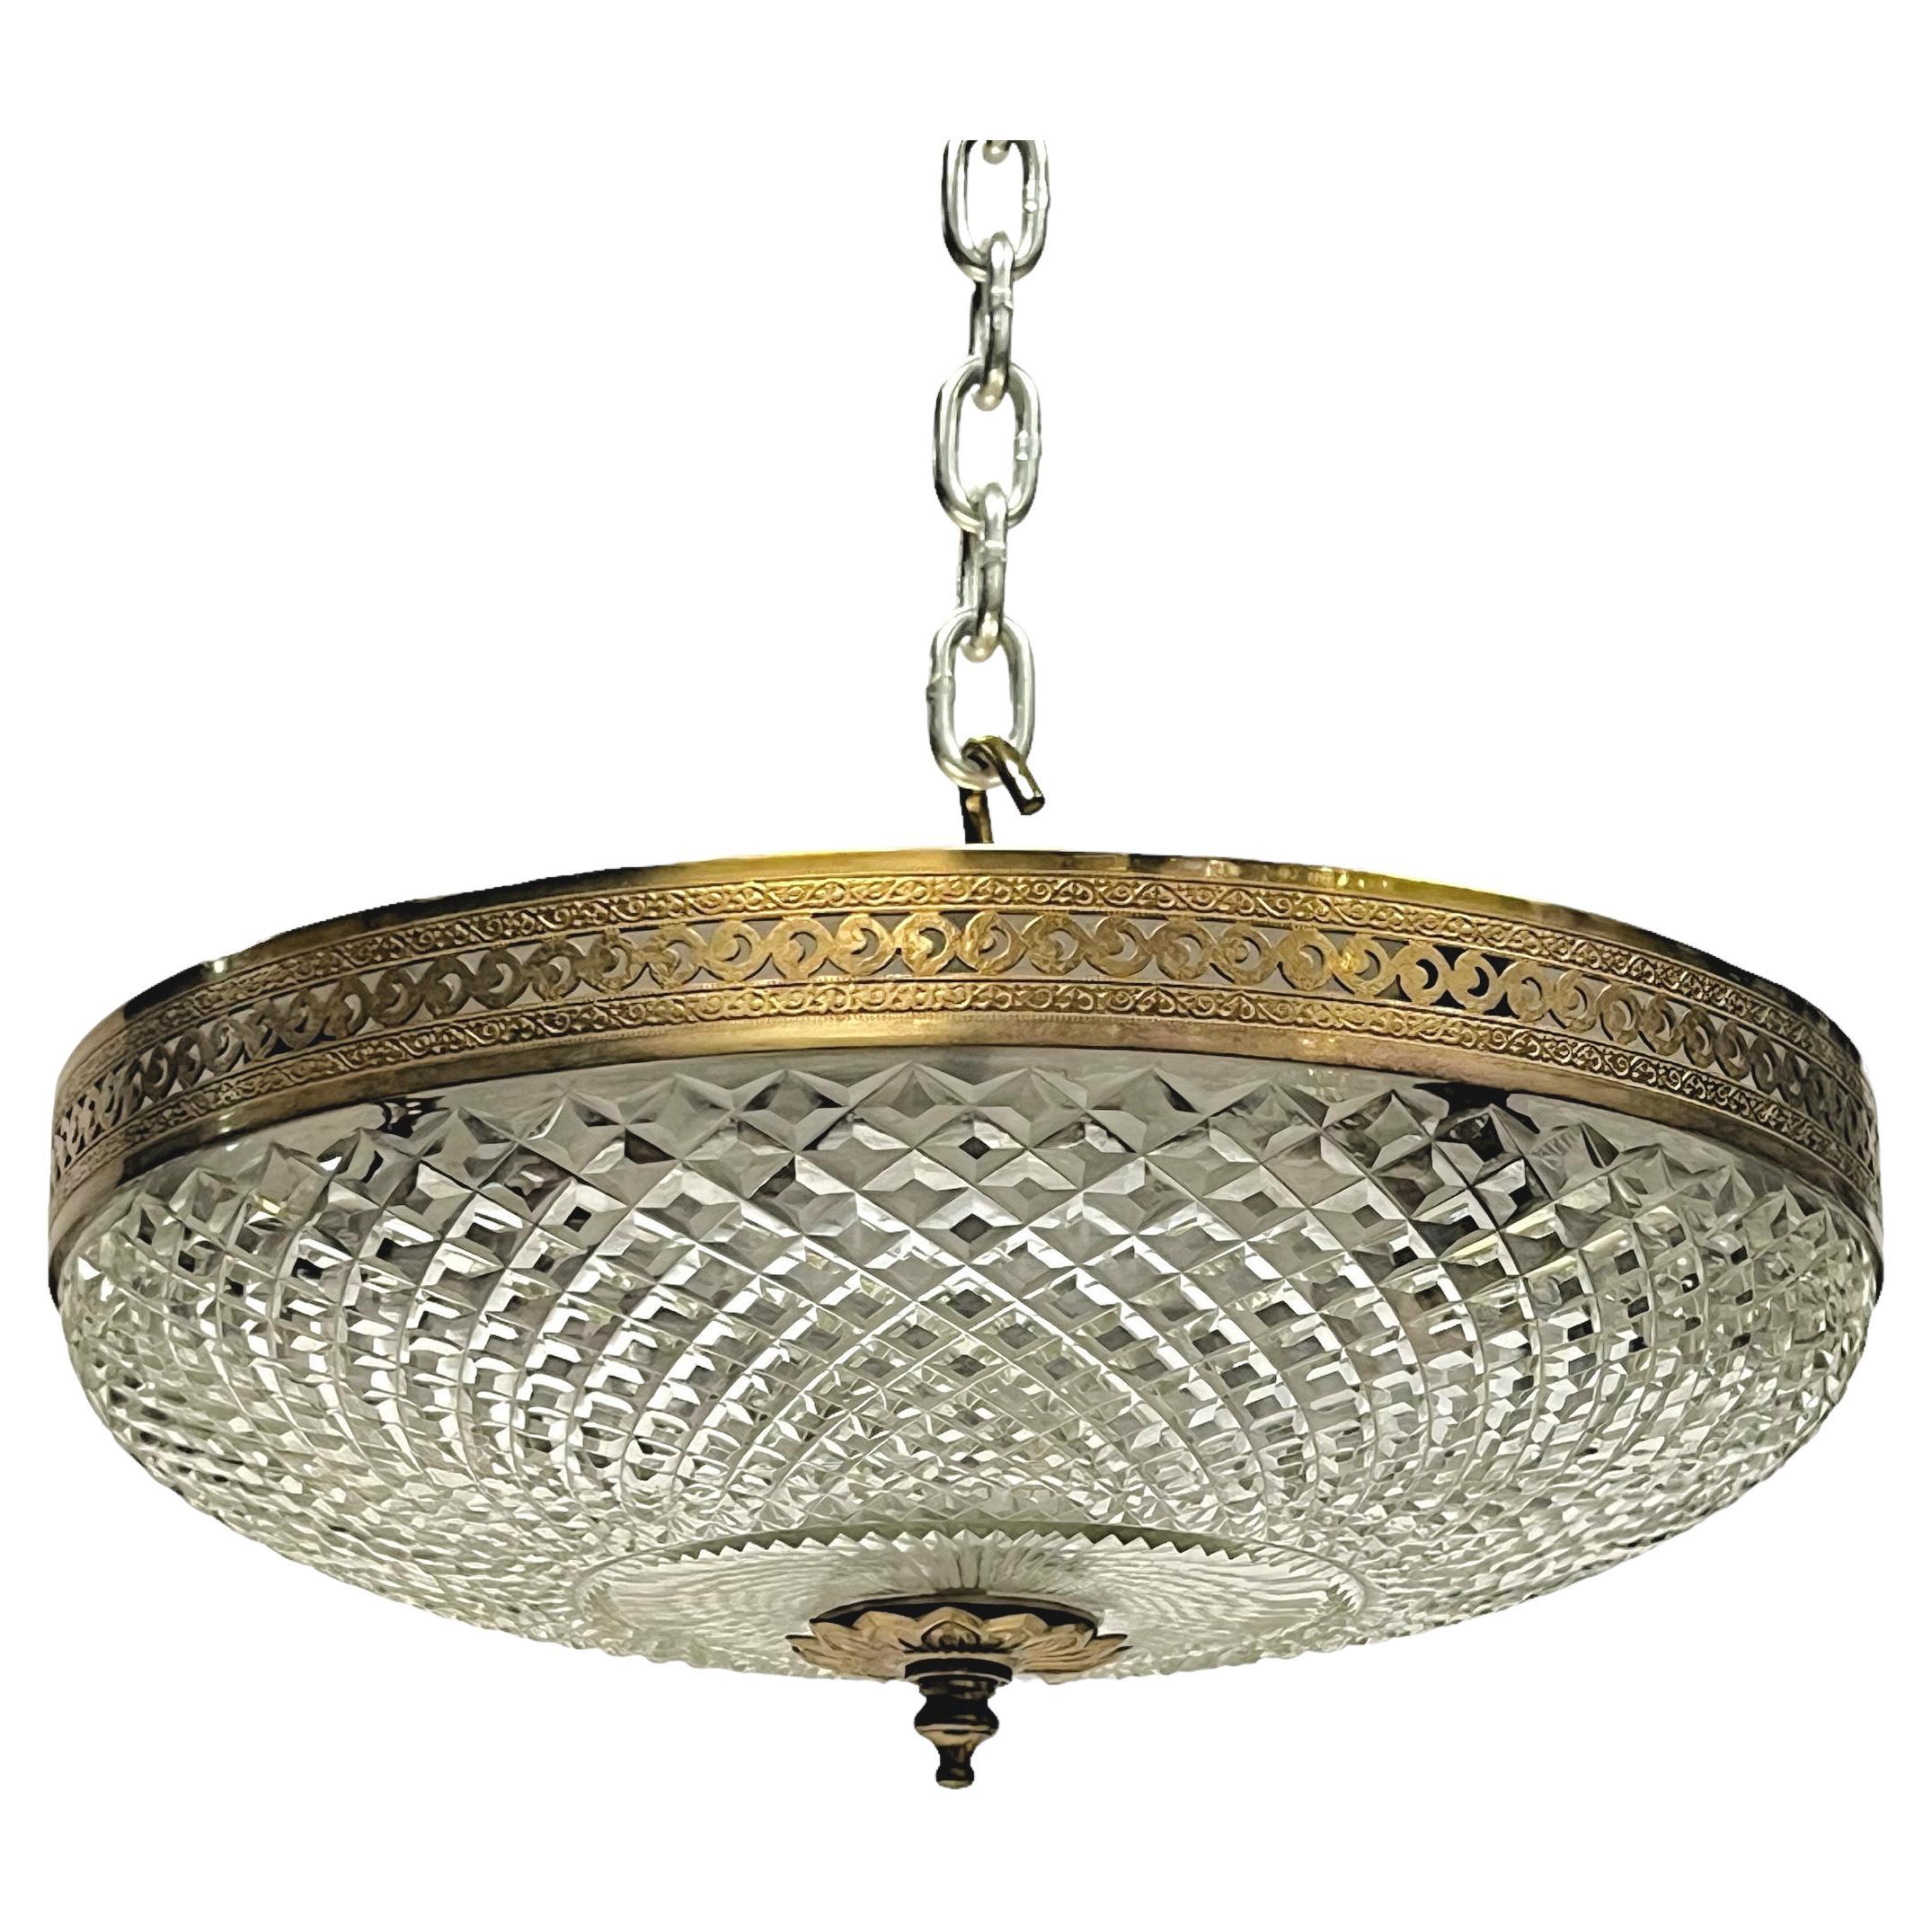 Vintage gilt metal and glass coupe form flush ceiling chandelier.